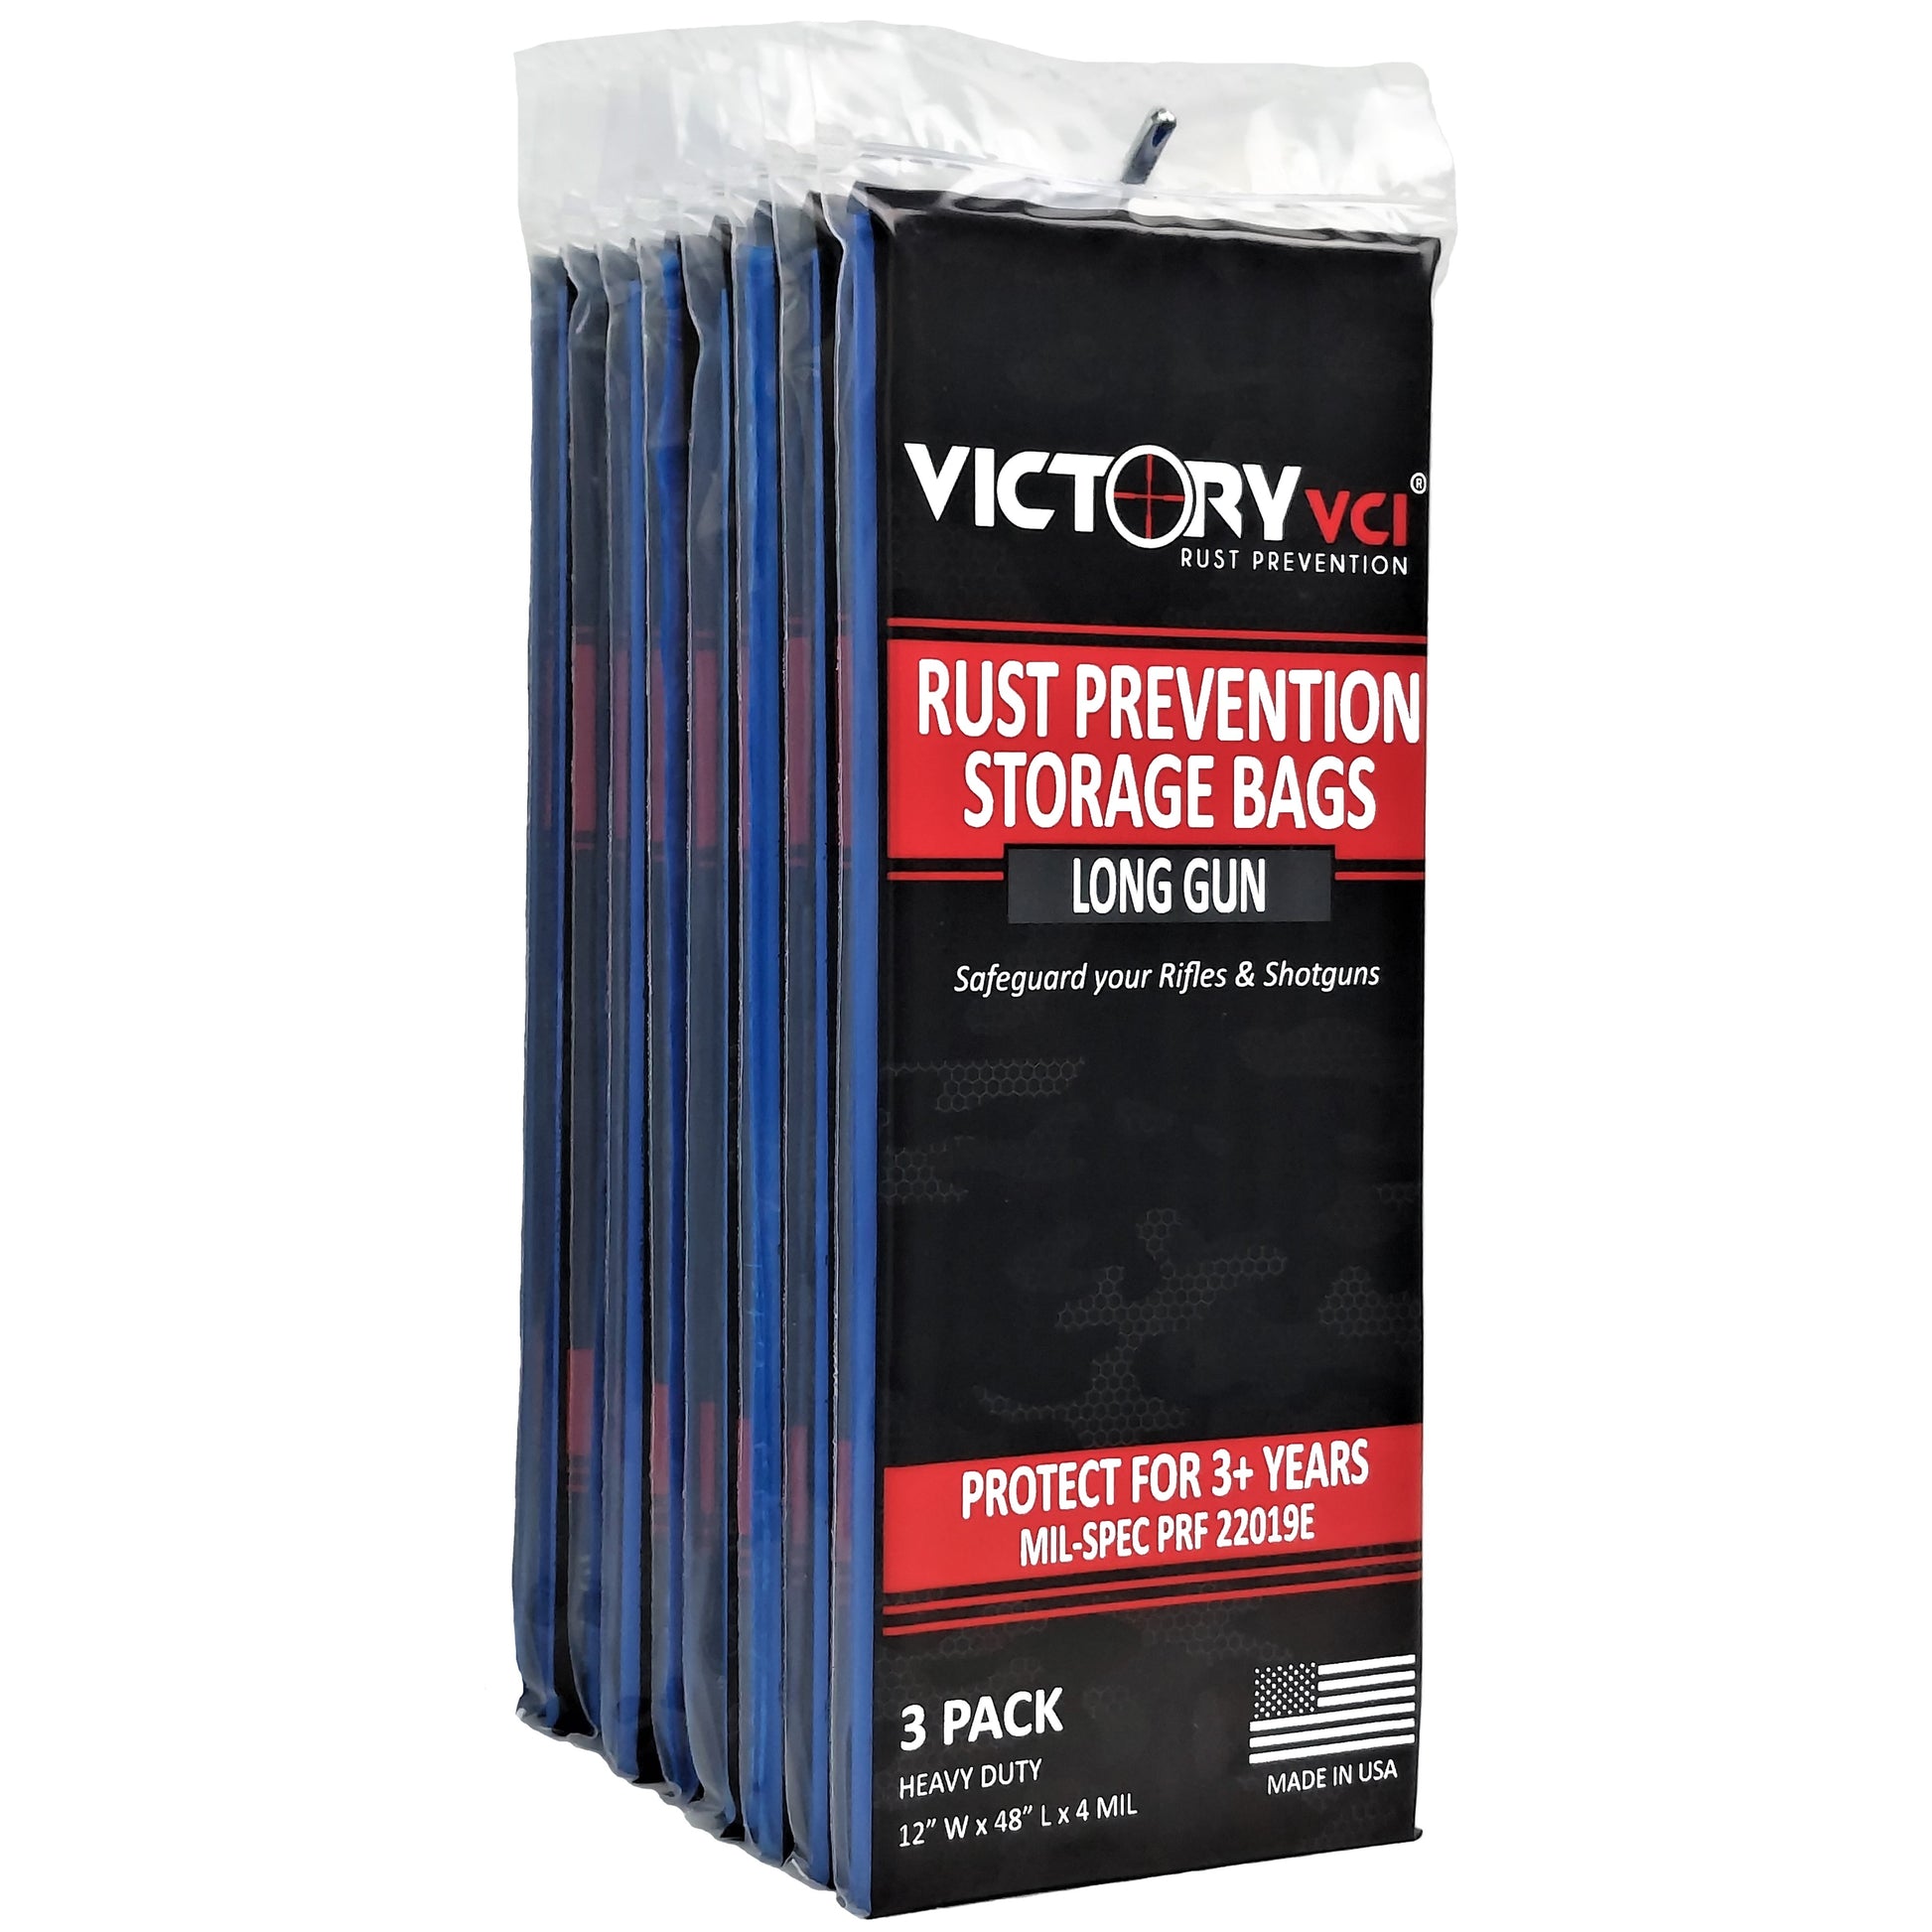 Prevent rust on guns & ammo with Victory VCI Bags.